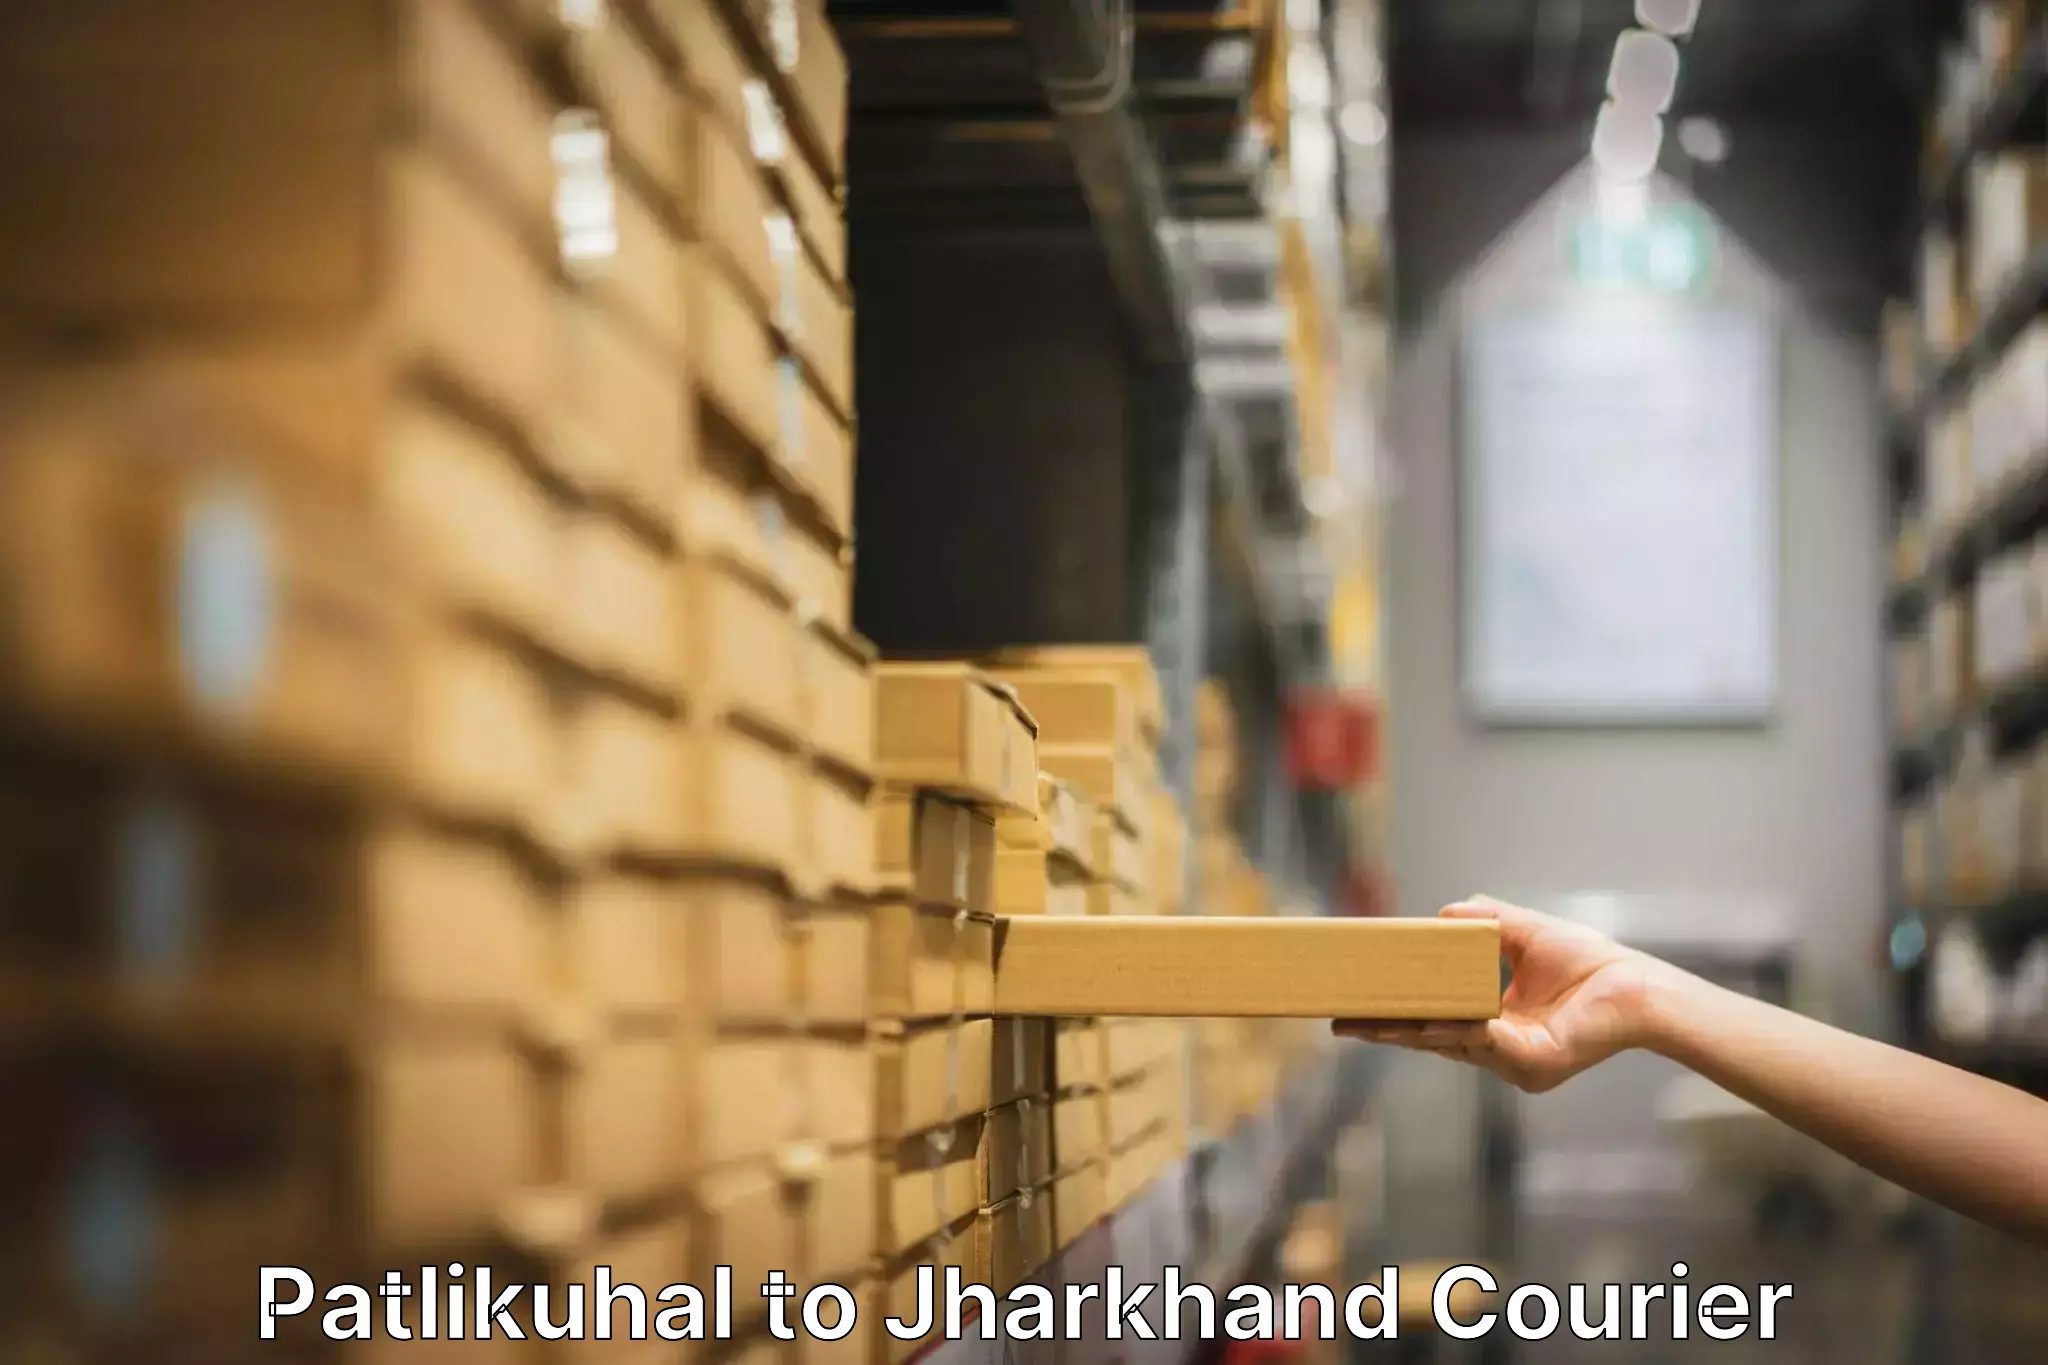 Furniture delivery service Patlikuhal to Jharkhand